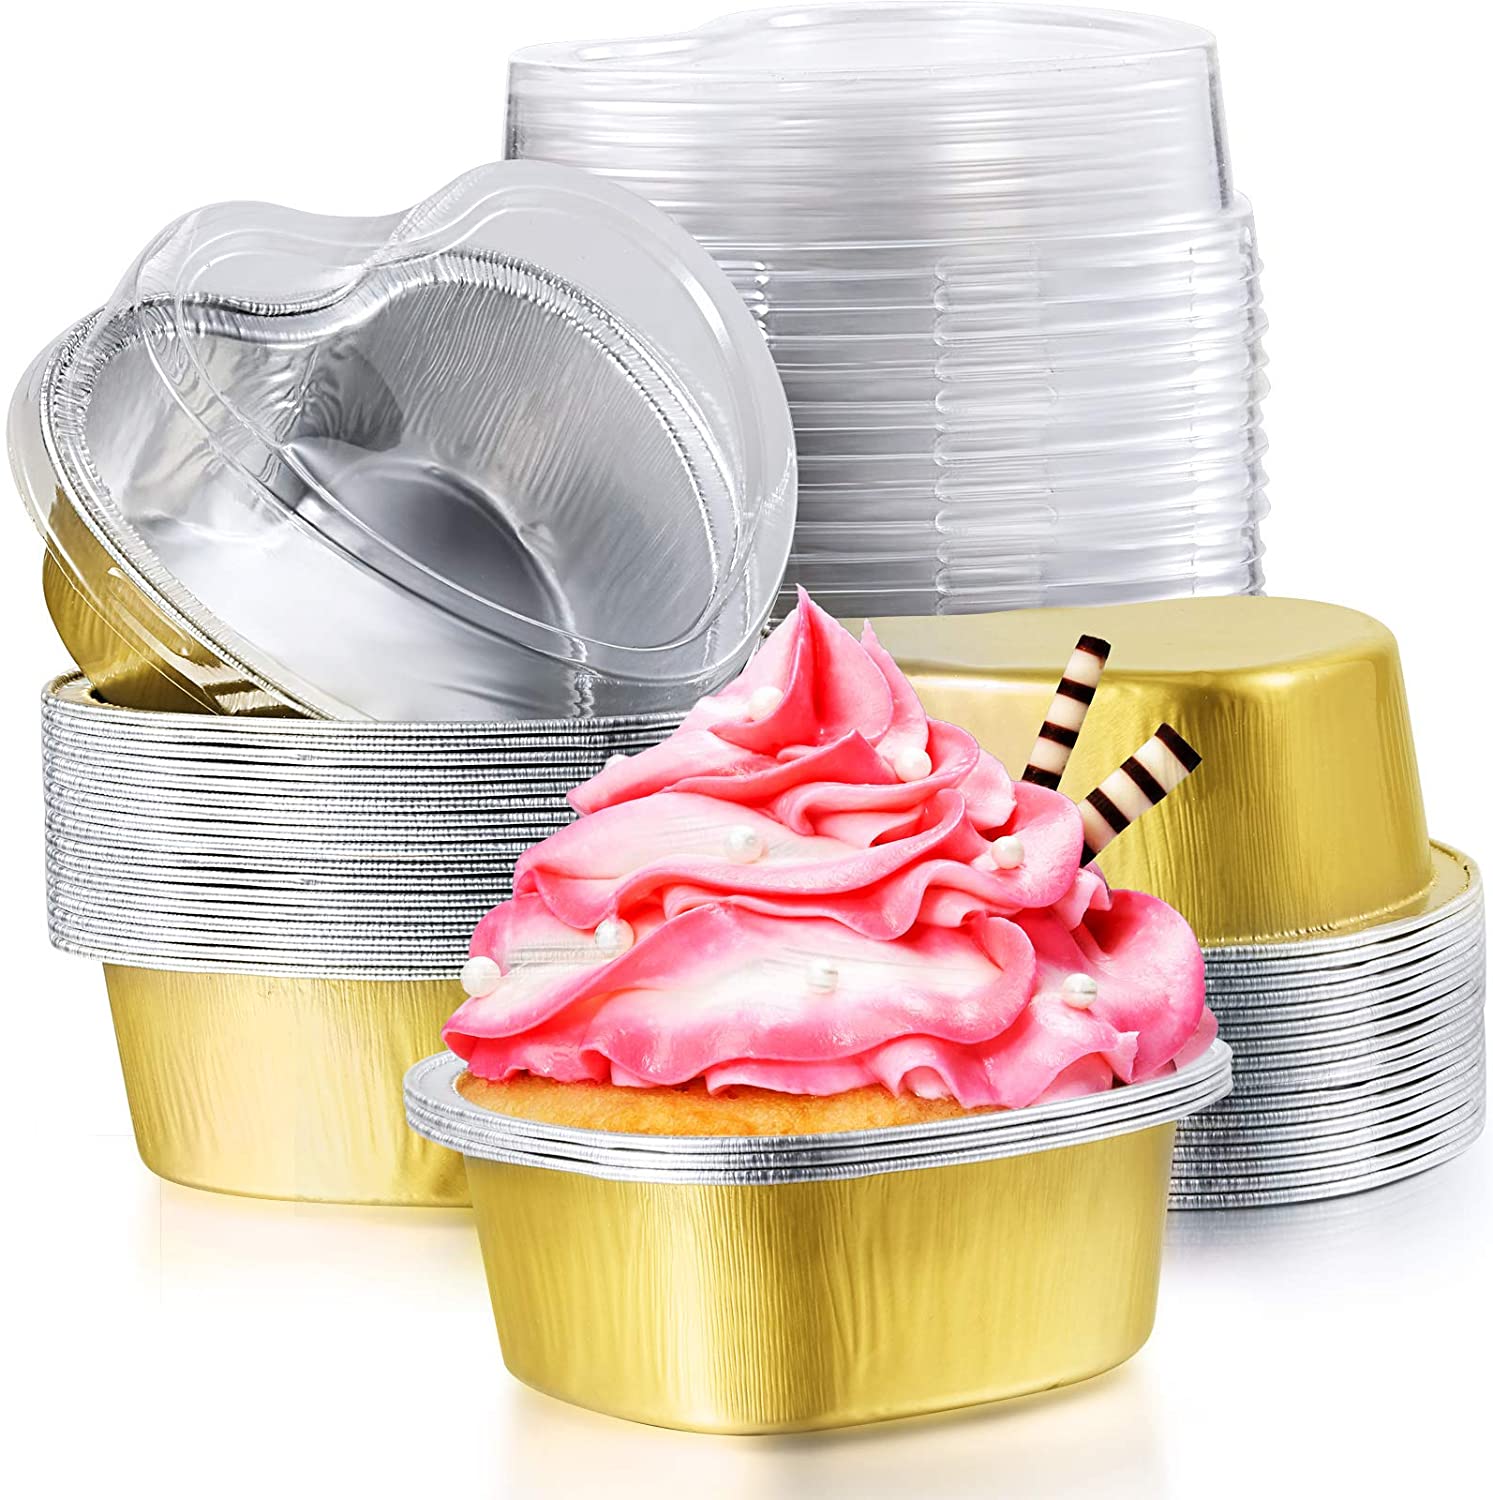 Aluminum Foil Cake Pan Heart Shaped Cupcake Cup with Lids 100 ml/ 3.4 Ounces Disposable Mini Cupcake Cup Flan Baking Cups for Va: golden